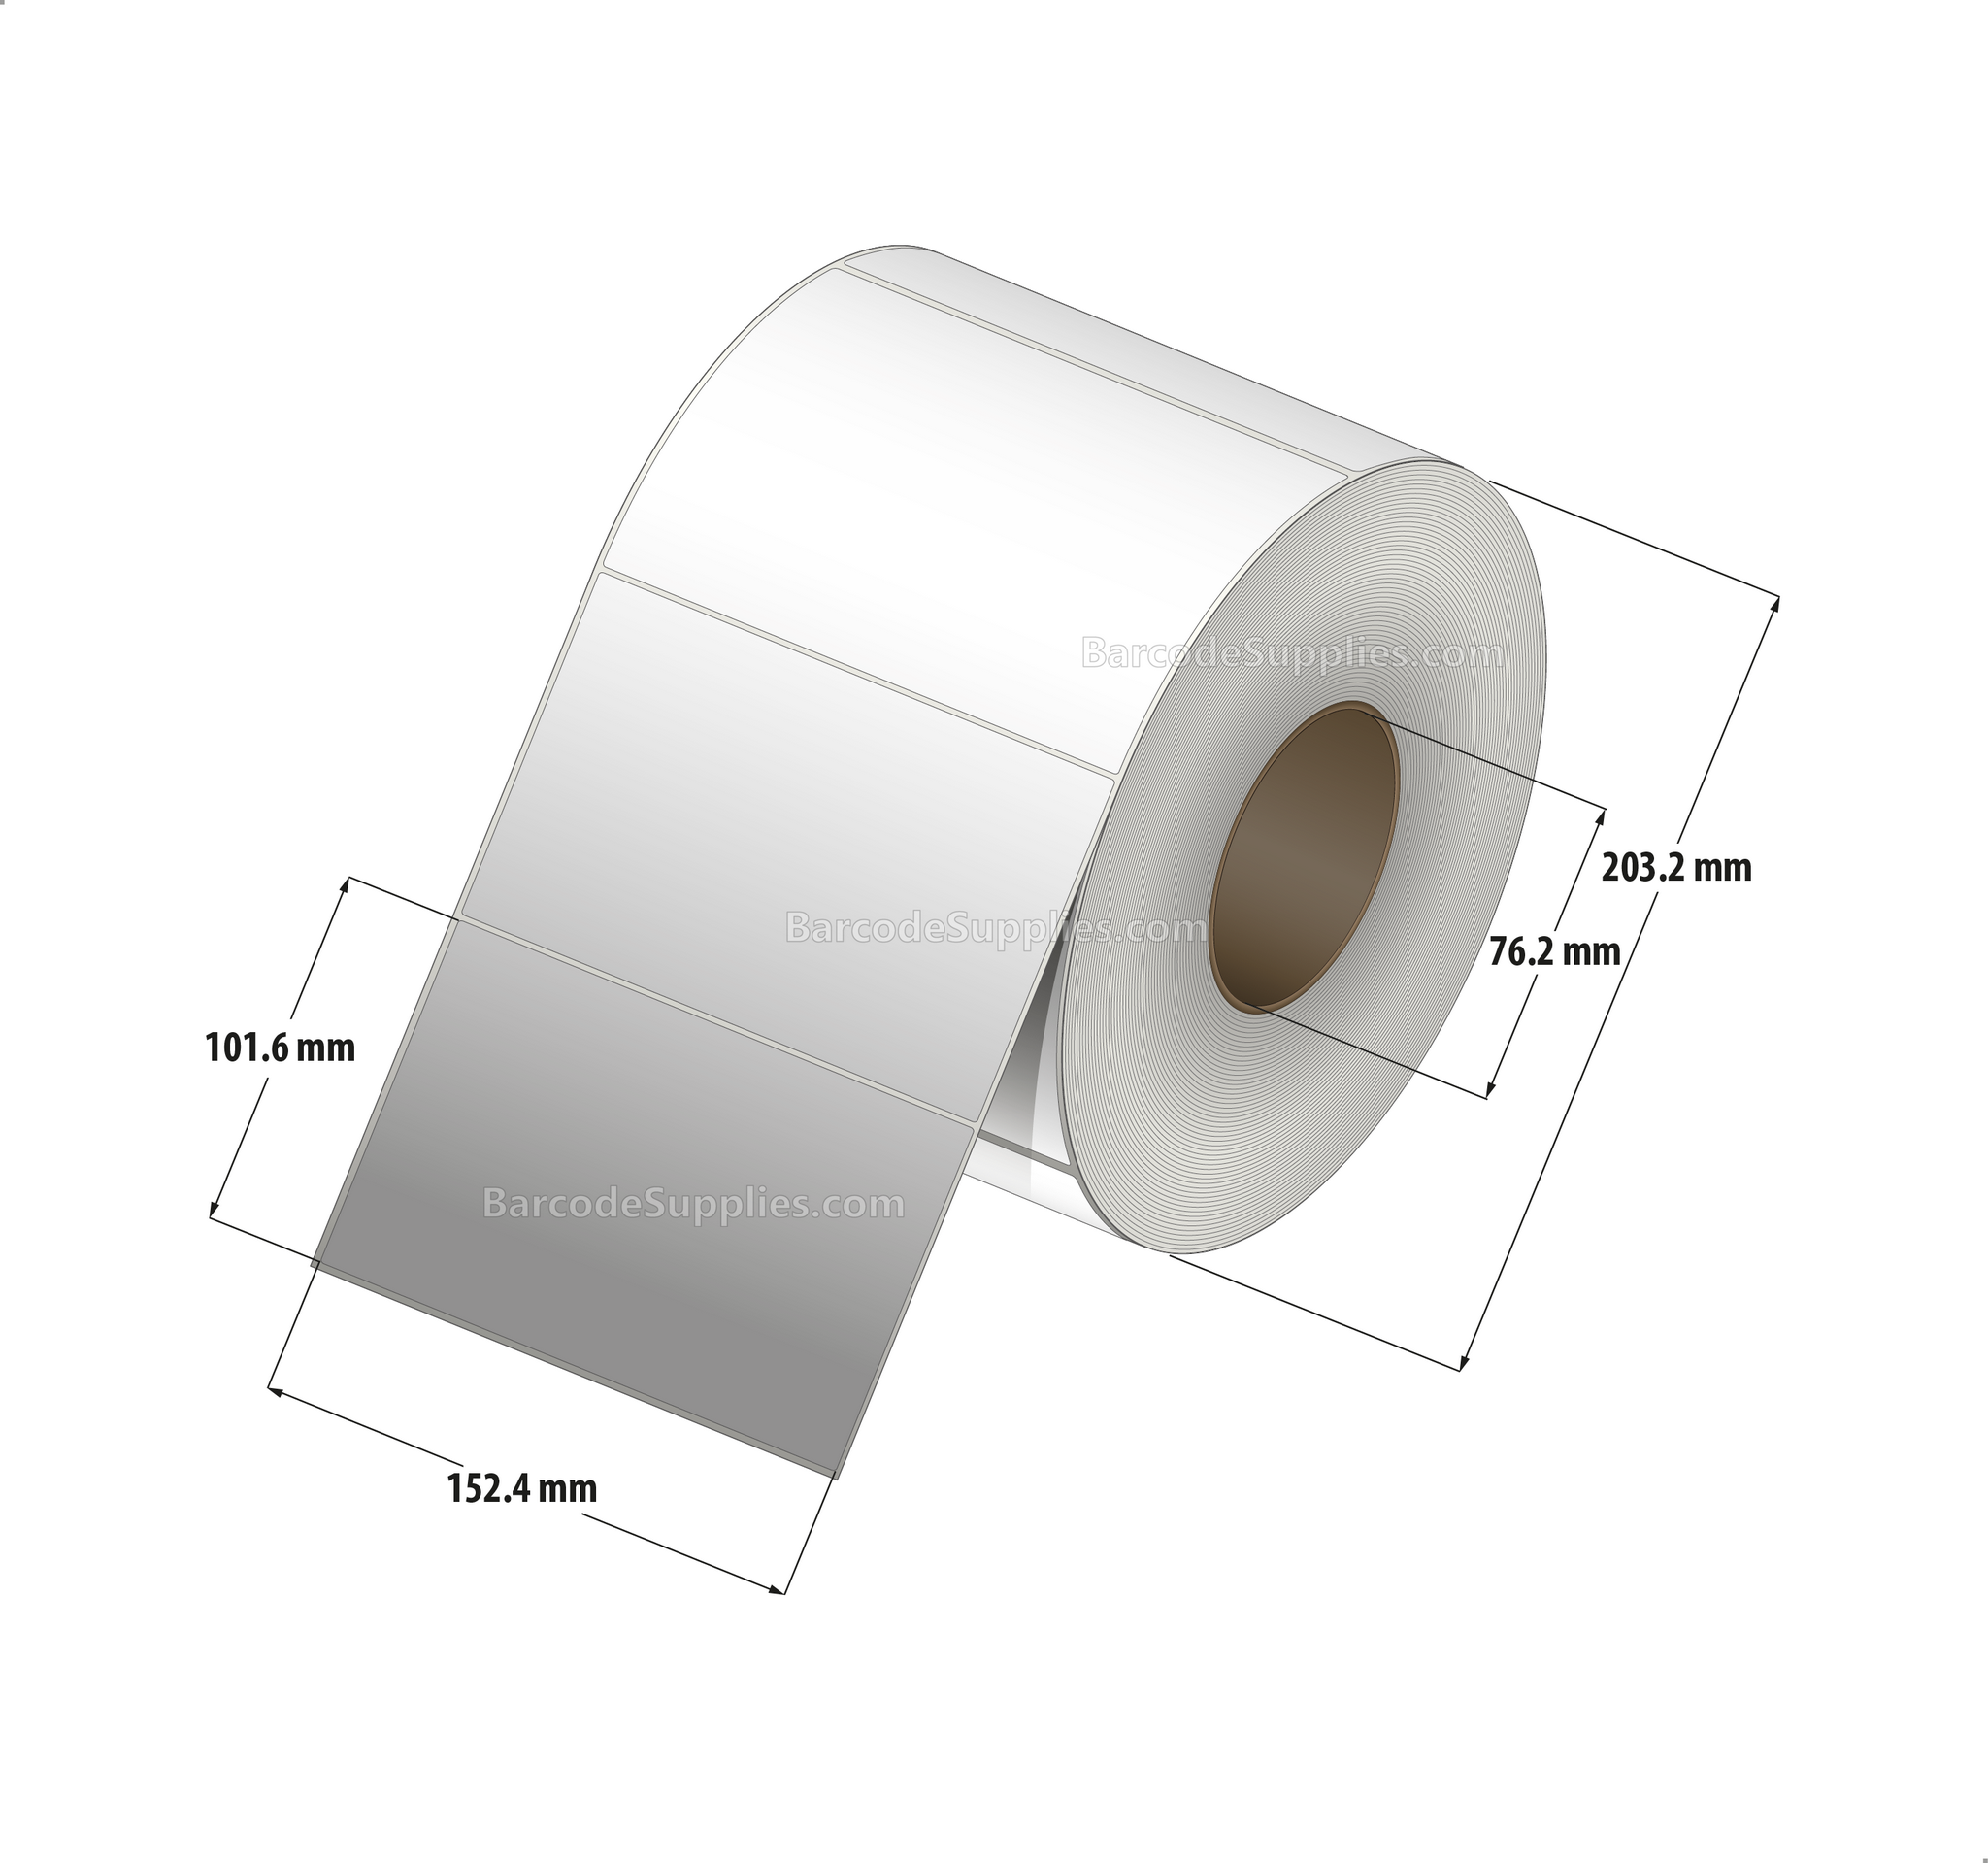 6 x 4 Thermal Transfer White Labels With Permanent Acrylic Adhesive - Not Perforated - 1500 Labels Per Roll - Carton Of 4 Rolls - 6000 Labels Total - MPN: TH64-1